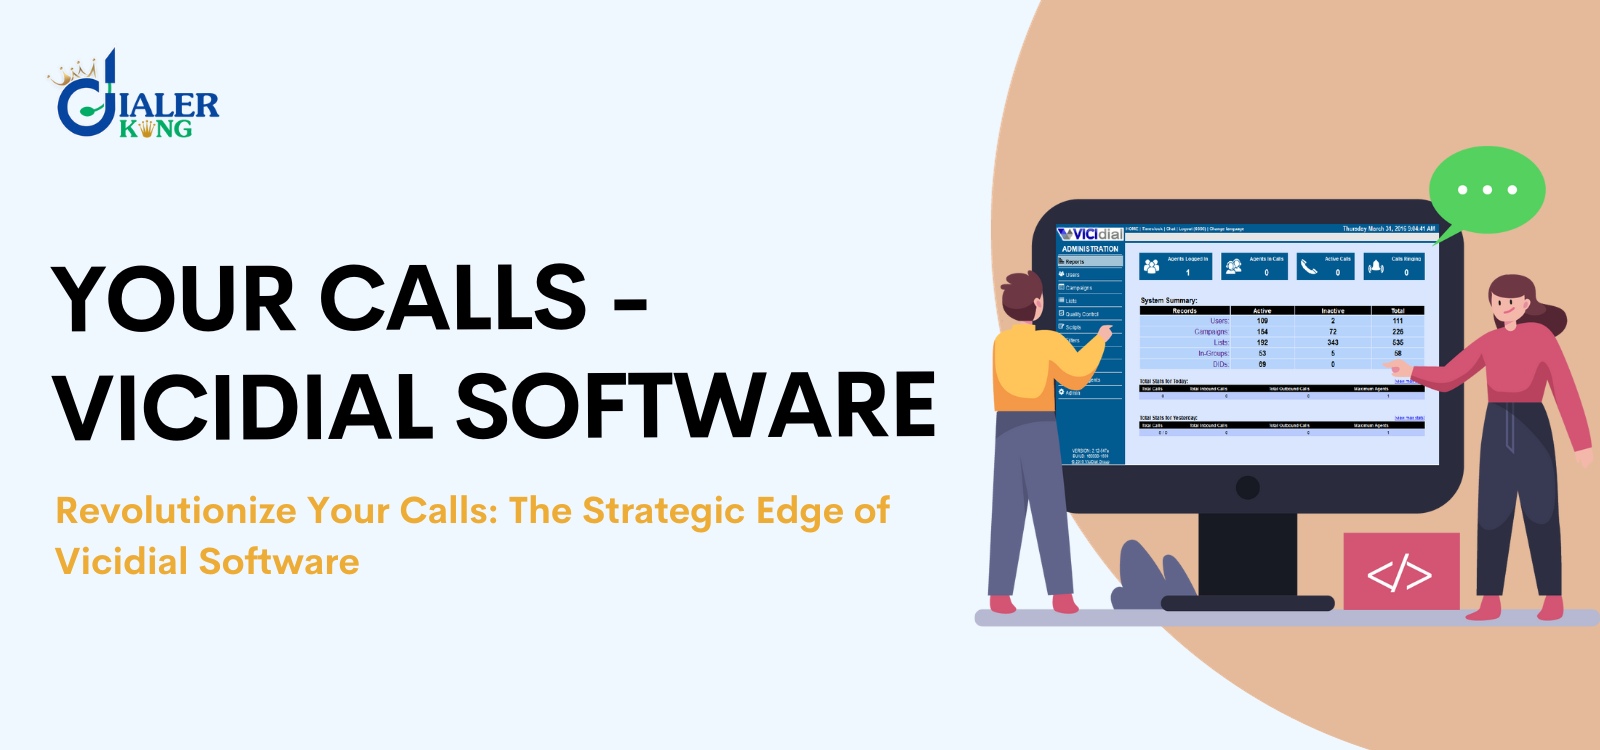 Your Calls - Vicidial Software